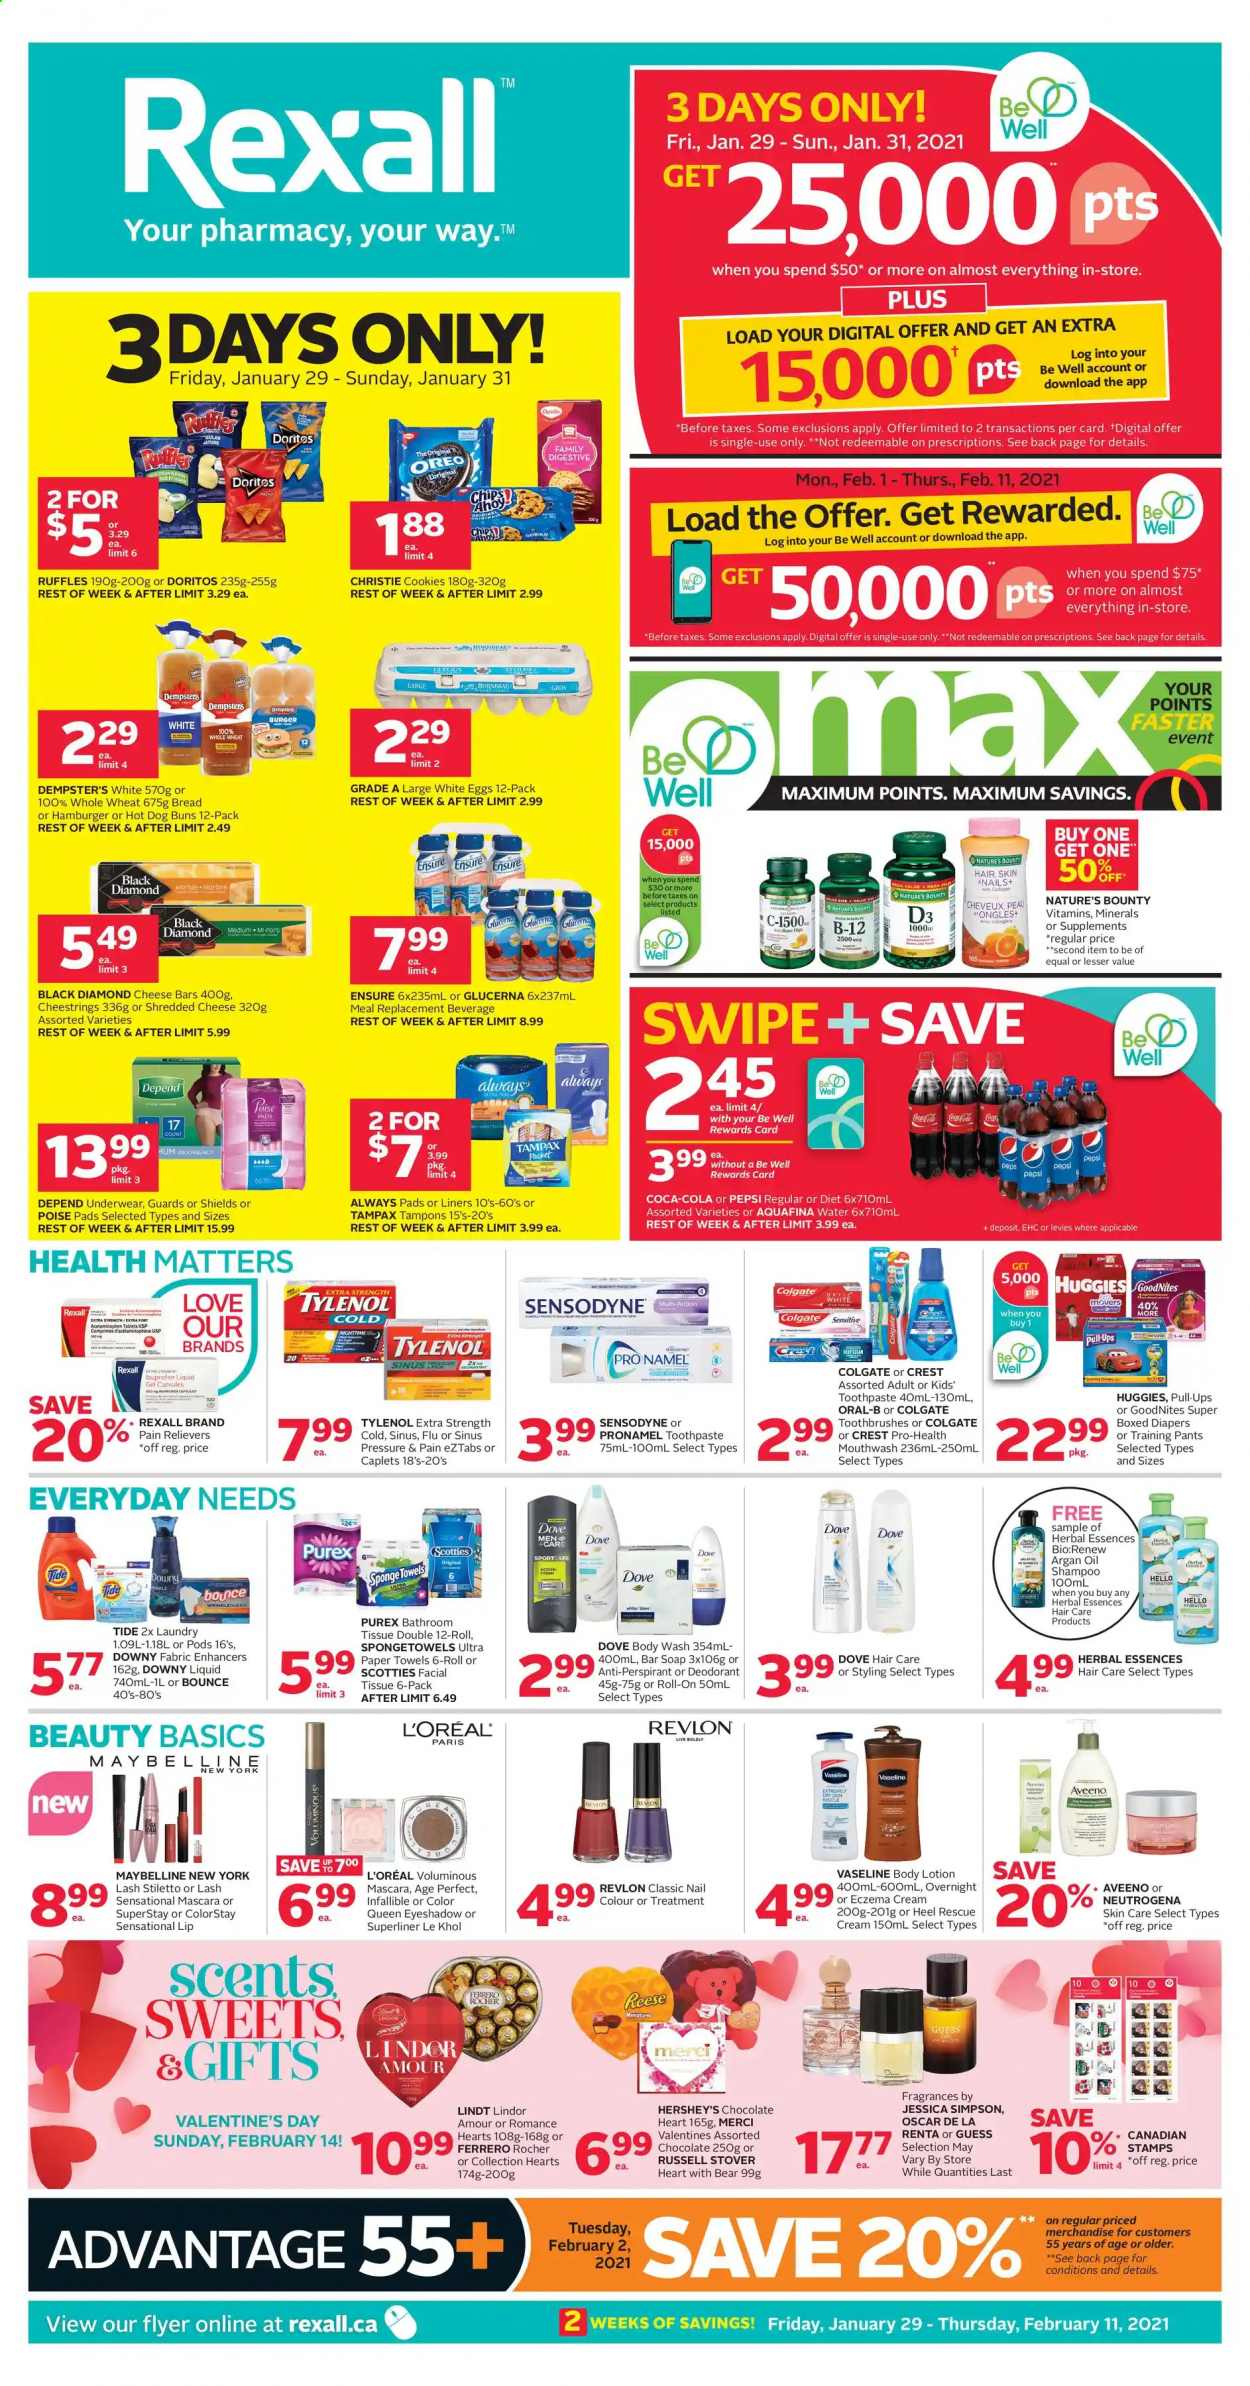 thumbnail - Rexall Flyer - January 29, 2021 - February 11, 2021 - Sales products - cookies, chocolate, Hershey's, Merci, Doritos, Ruffles, Coca-Cola, Pepsi, Aquafina, pants, nappies, baby pants, Aveeno, tissues, kitchen towels, paper towels, Tide, Bounce, Purex, Downy Laundry, body wash, Vaseline, soap bar, soap, toothpaste, mouthwash, Crest, Always pads, sanitary pads, tampons, L’Oréal, Revlon, Herbal Essences, body lotion, anti-perspirant, roll-on, Guess, Mum, eyeshadow, sponge, Nature's Bounty, Tylenol, Ibuprofen, Glucerna, argan oil, vitamin D3, Oreo, mascara, Maybelline, Neutrogena, shampoo, Tampax, Huggies, Oral-B, chips, Sensodyne, deodorant. Page 1.